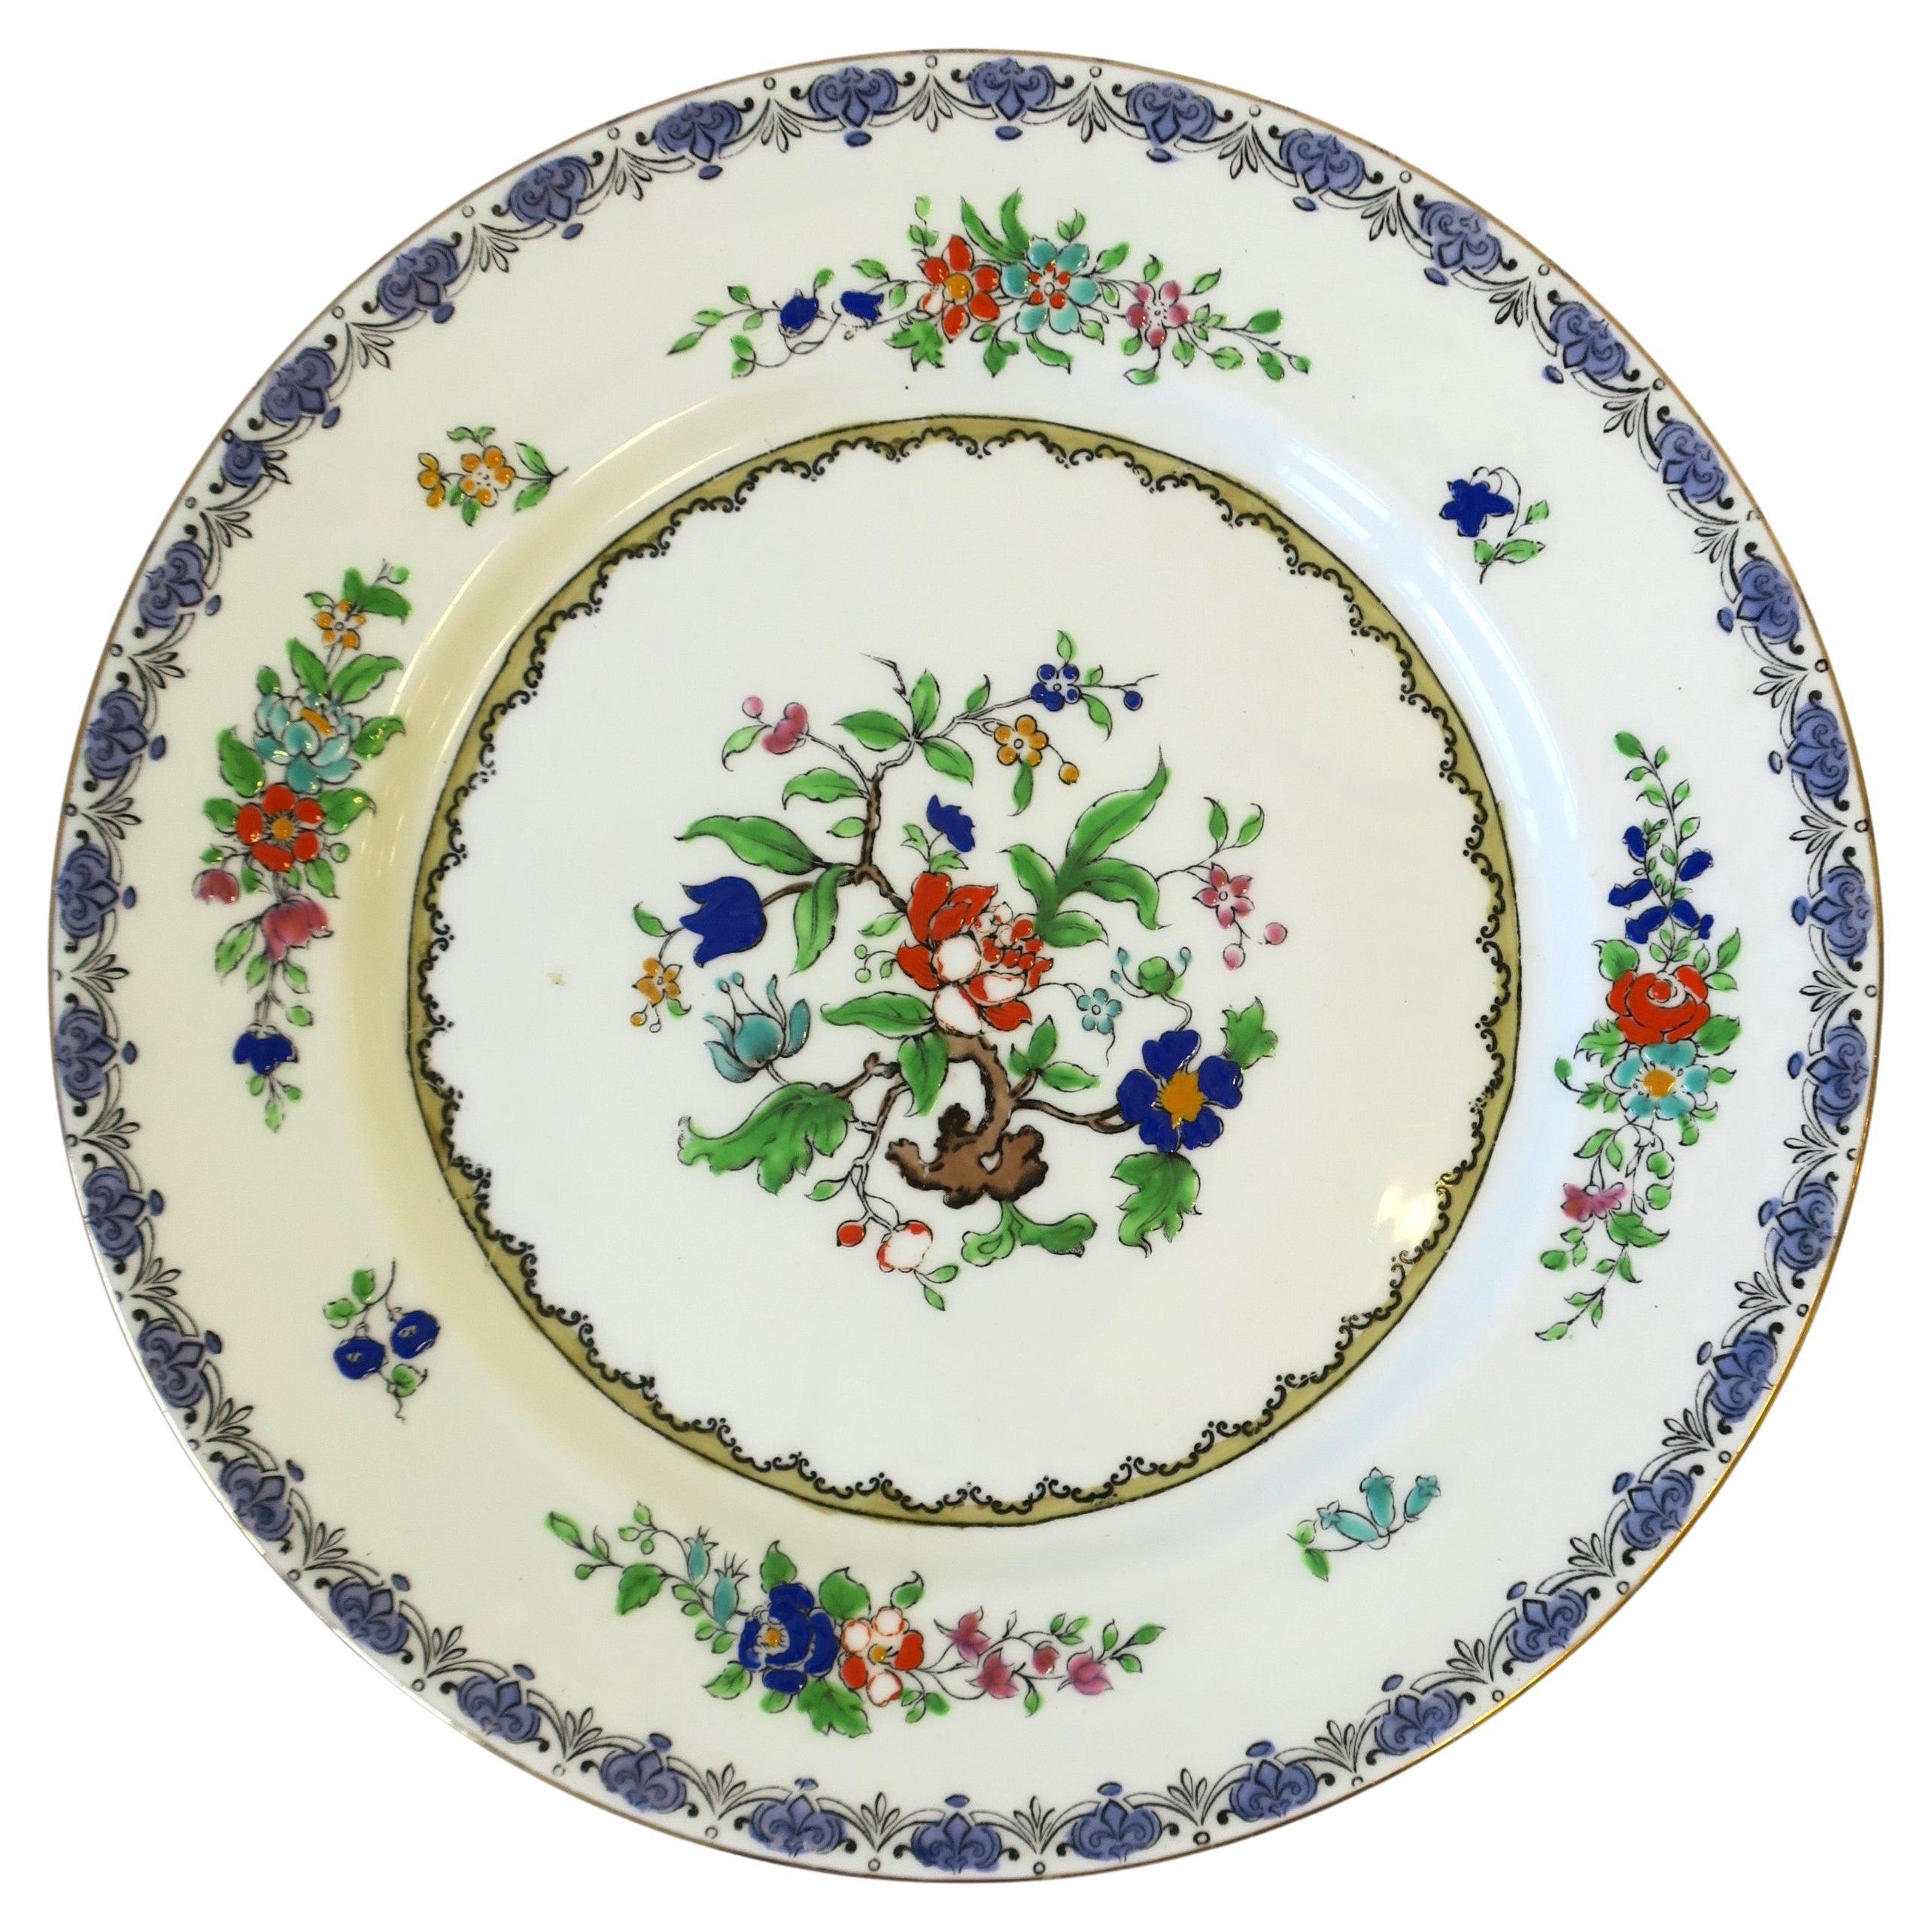 English Adderley Ware Porcelain Plates, Pair For Sale